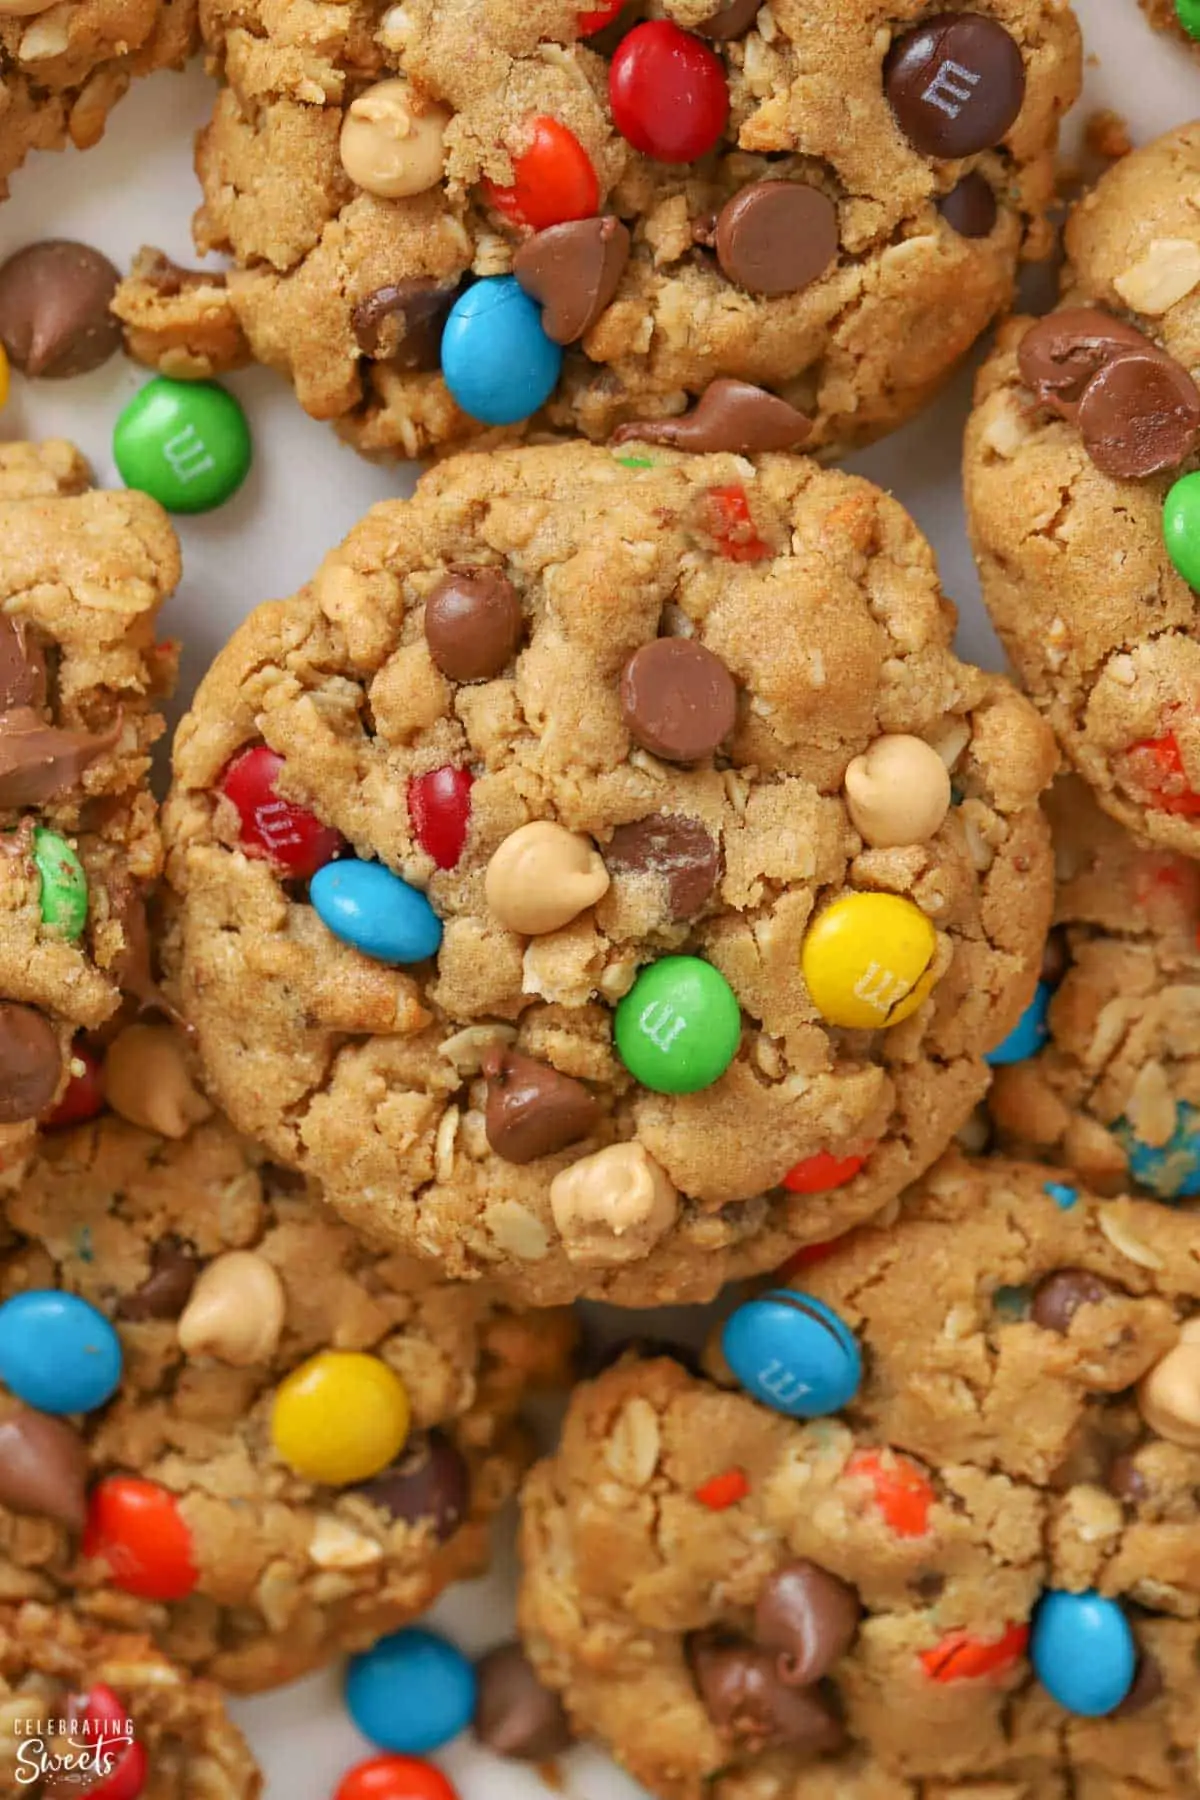 Closeup of Monster Cookies laying on parchment paper topped with M&M's and chocolate chips